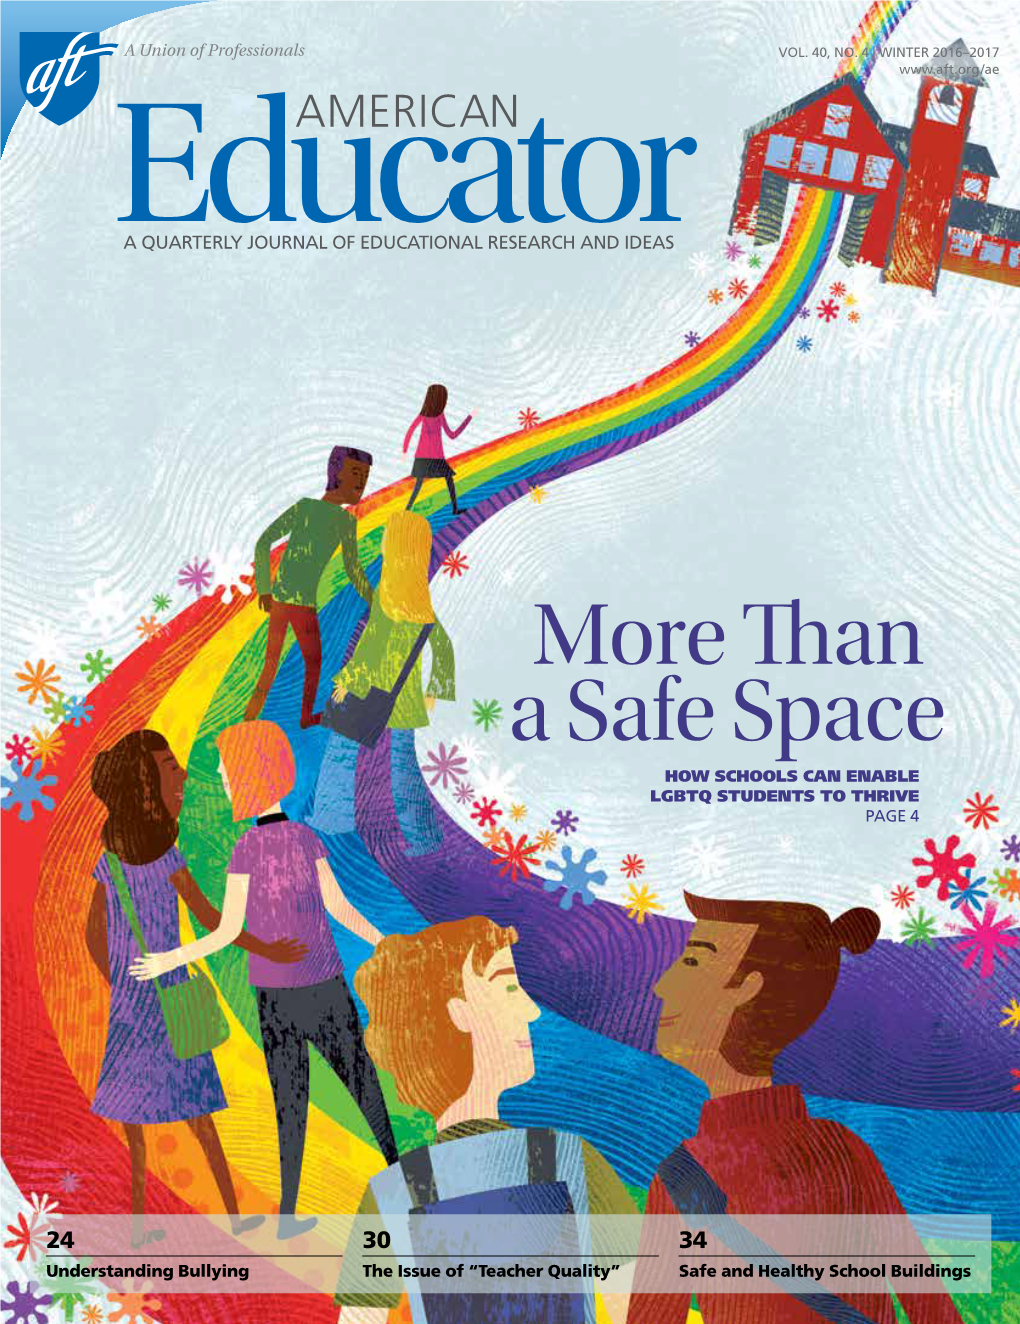 More Than a Safe Space HOW SCHOOLS CAN ENABLE LGBTQ STUDENTS to THRIVE PAGE 4